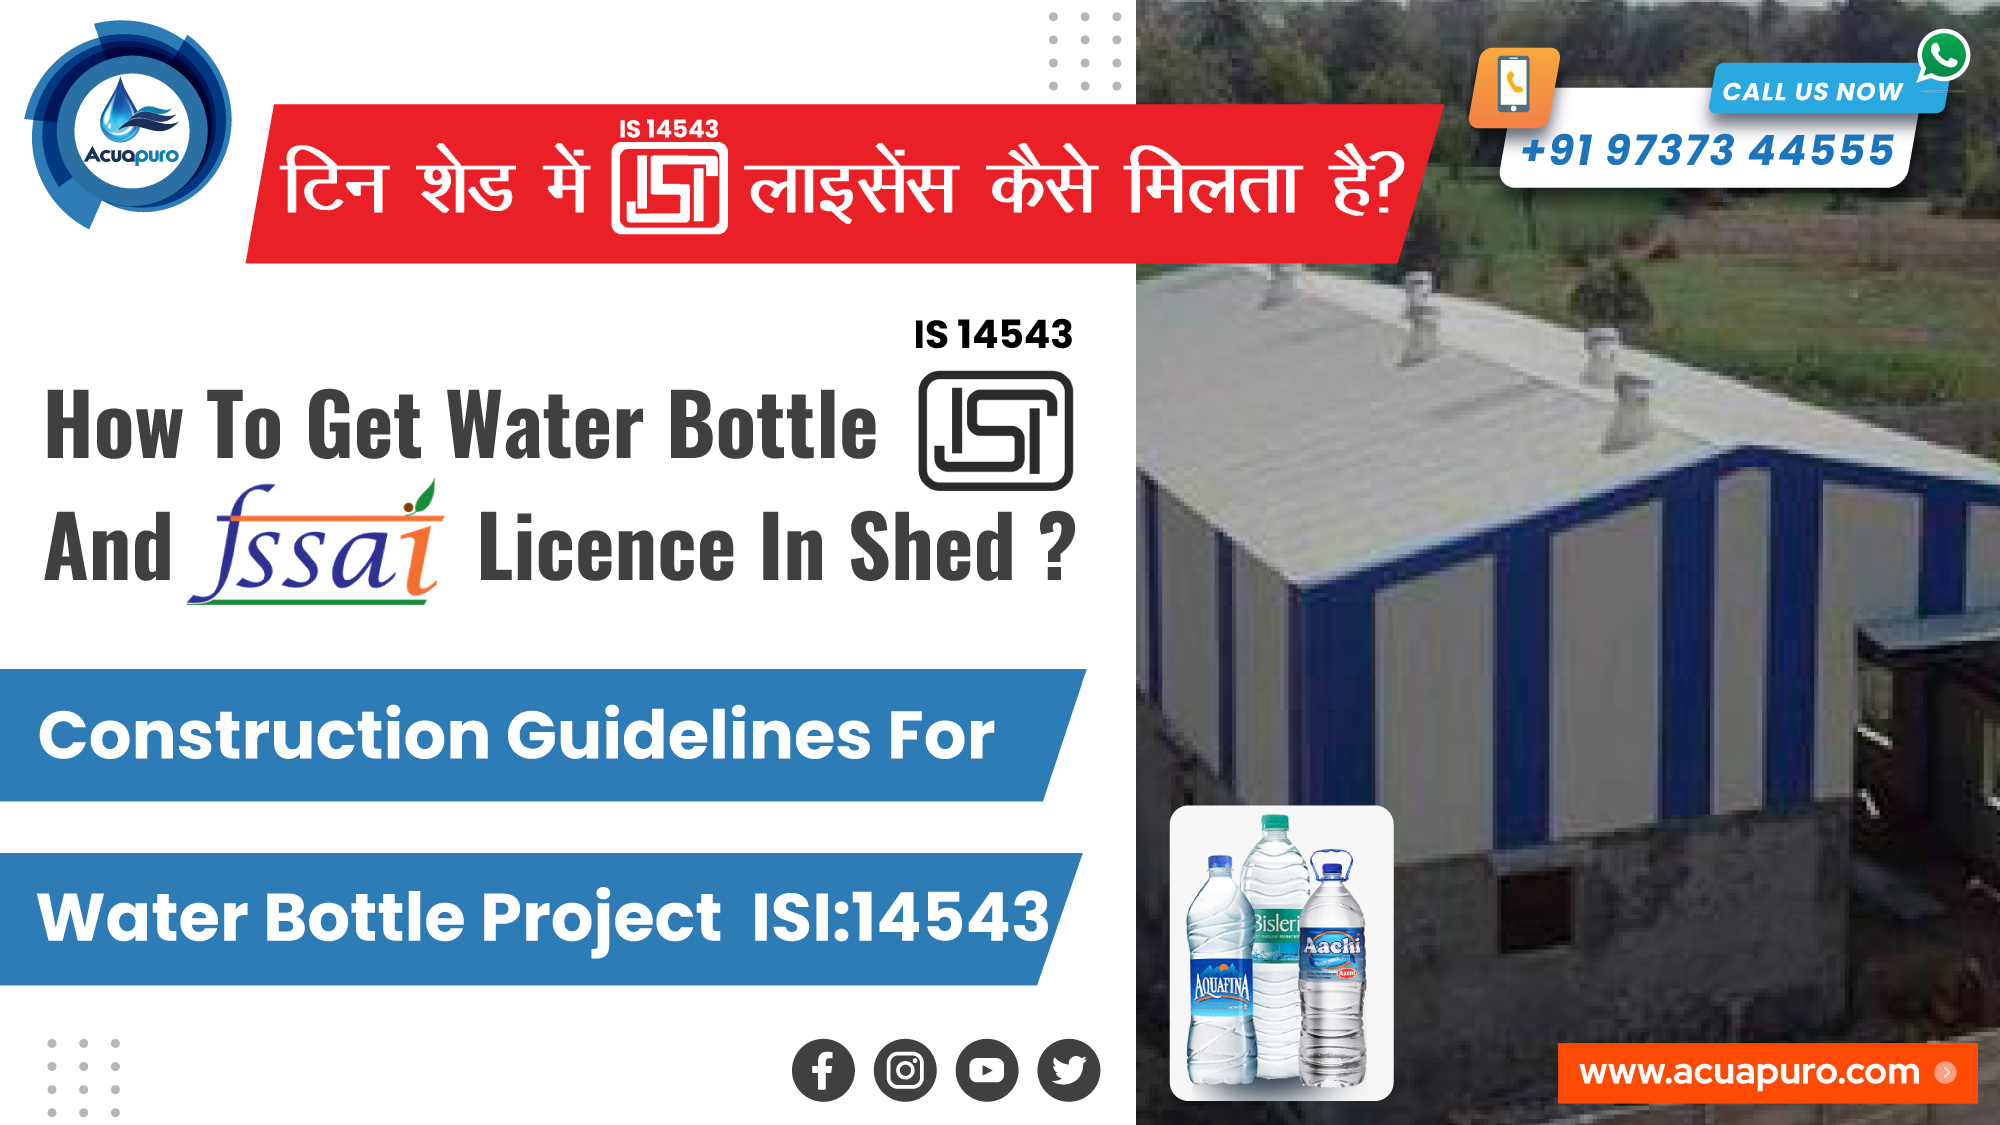 How To Get ISI Licenses For Water Bottle Plant Business